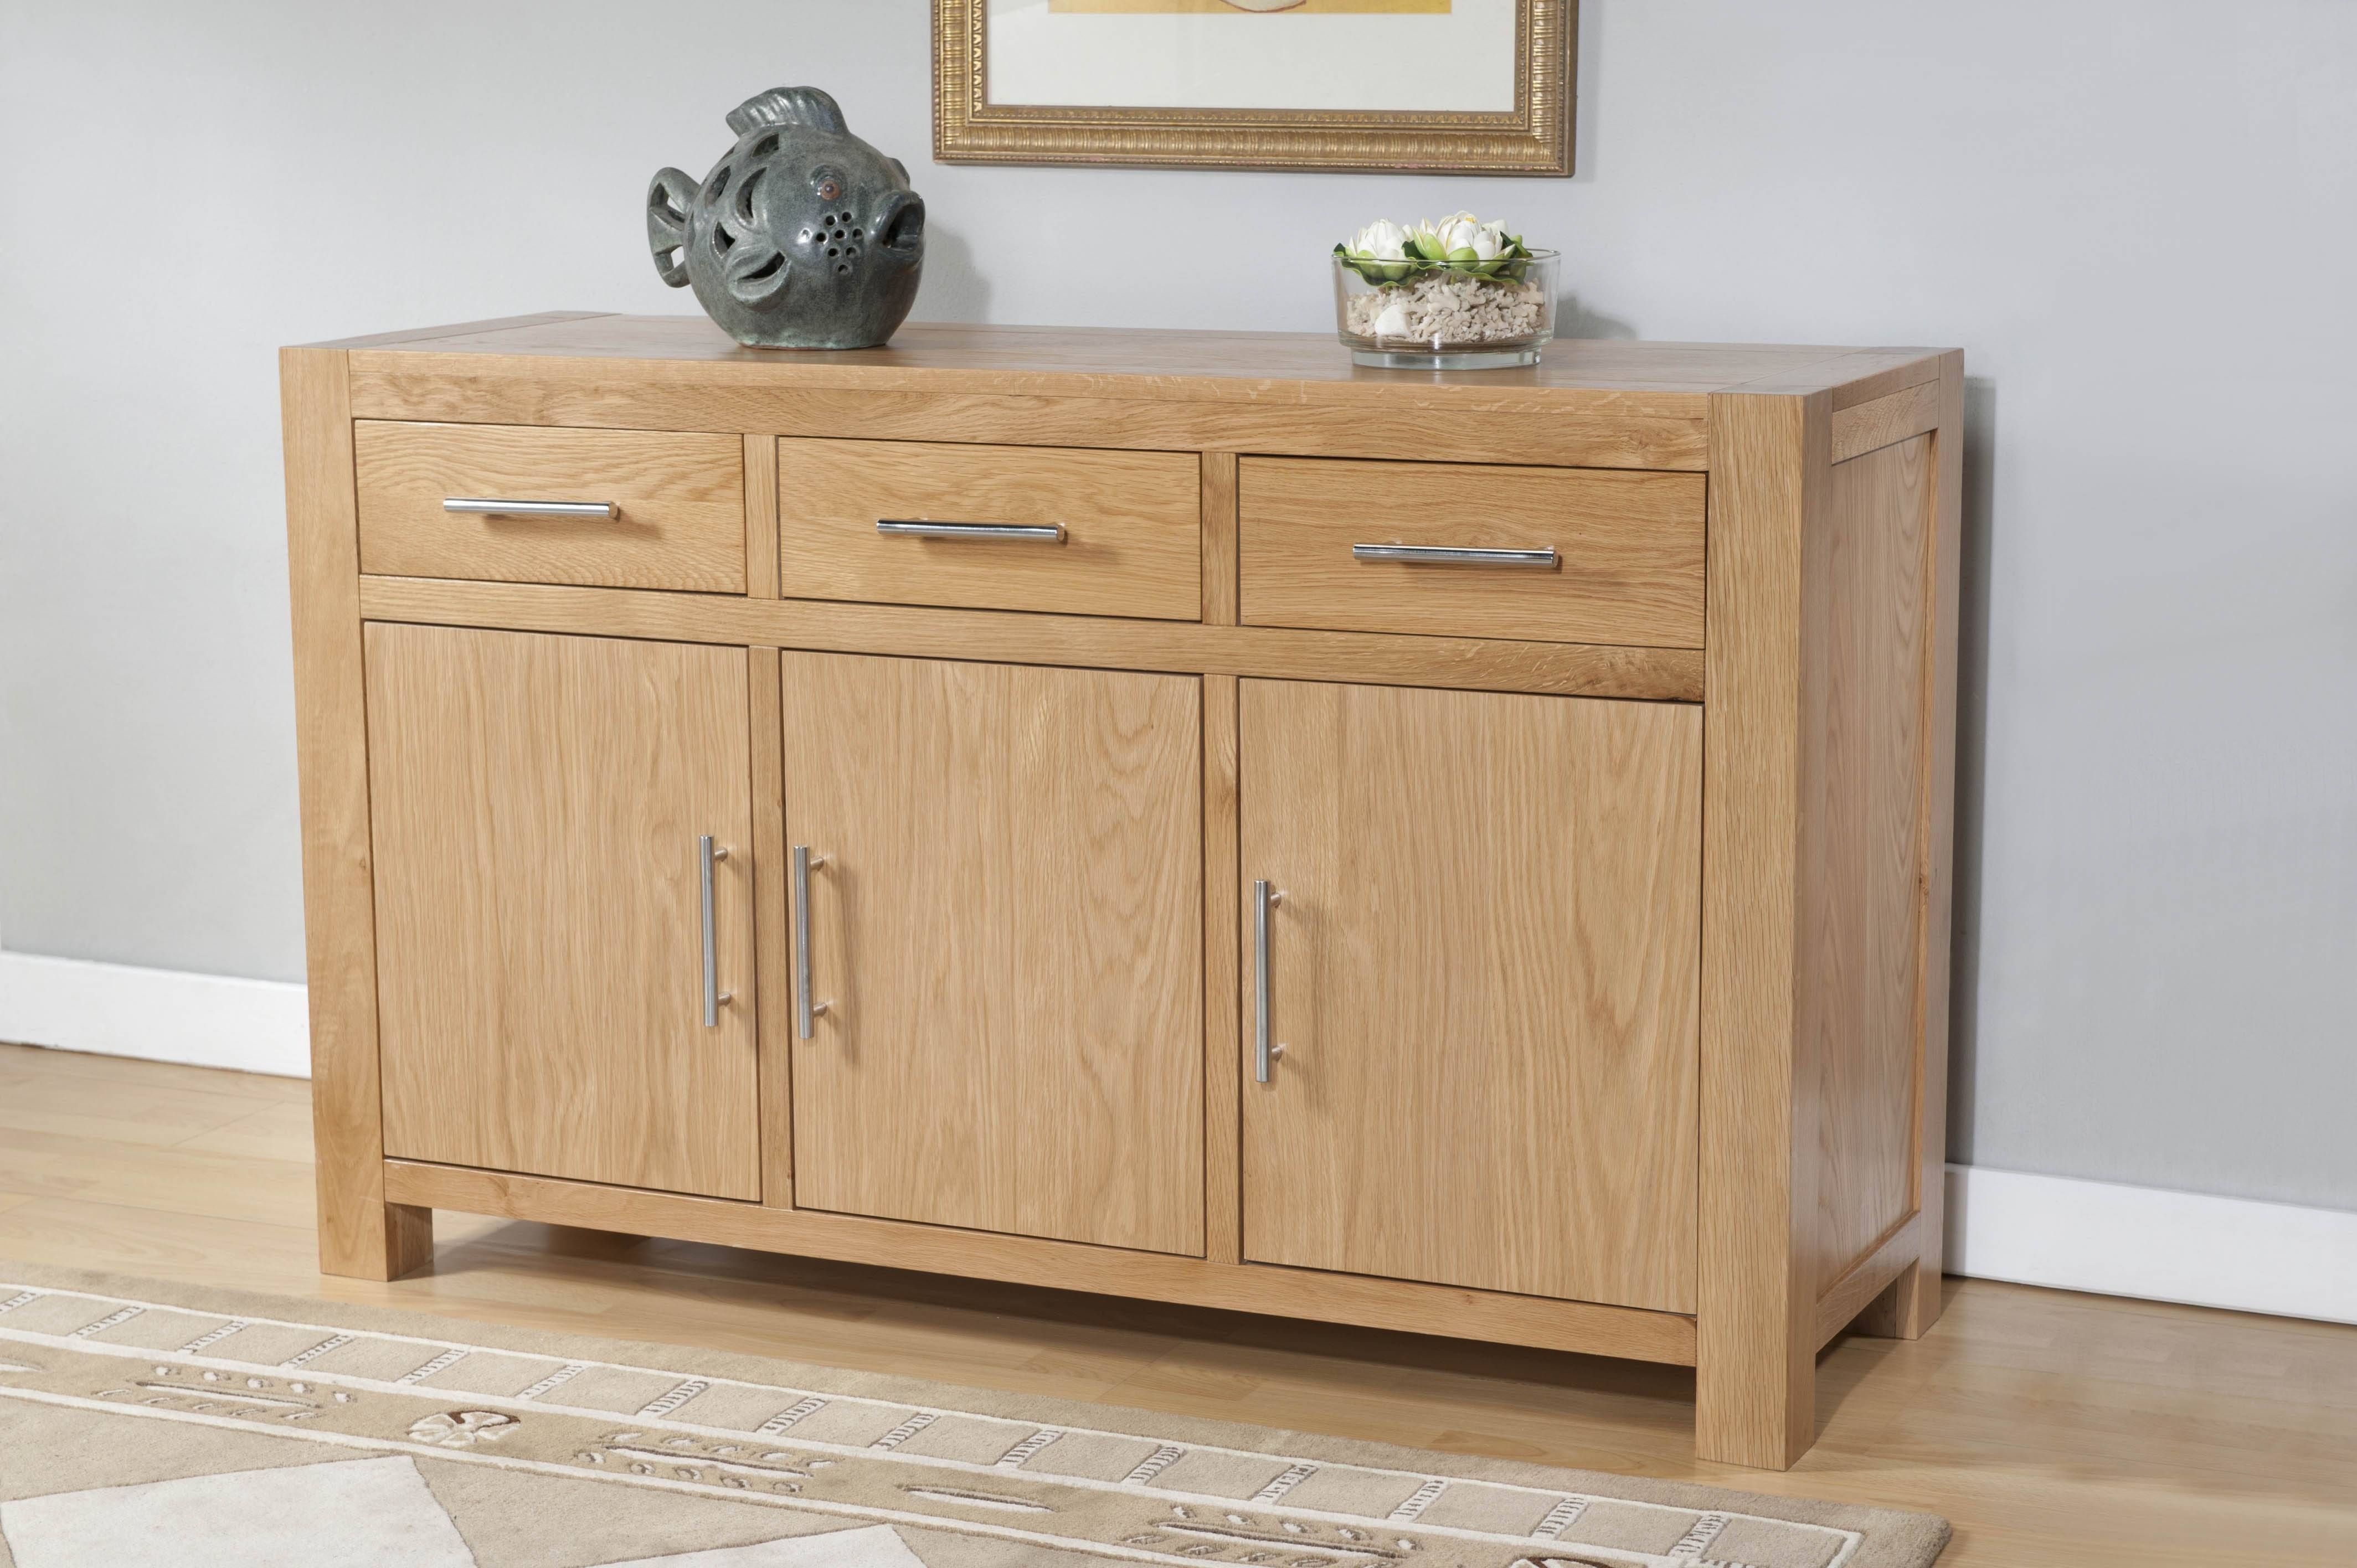 Milano Oak 3 Door 3 Drawer Large Sideboard | Oak Furniture Solutions Inside Sideboards With Drawers (View 2 of 15)